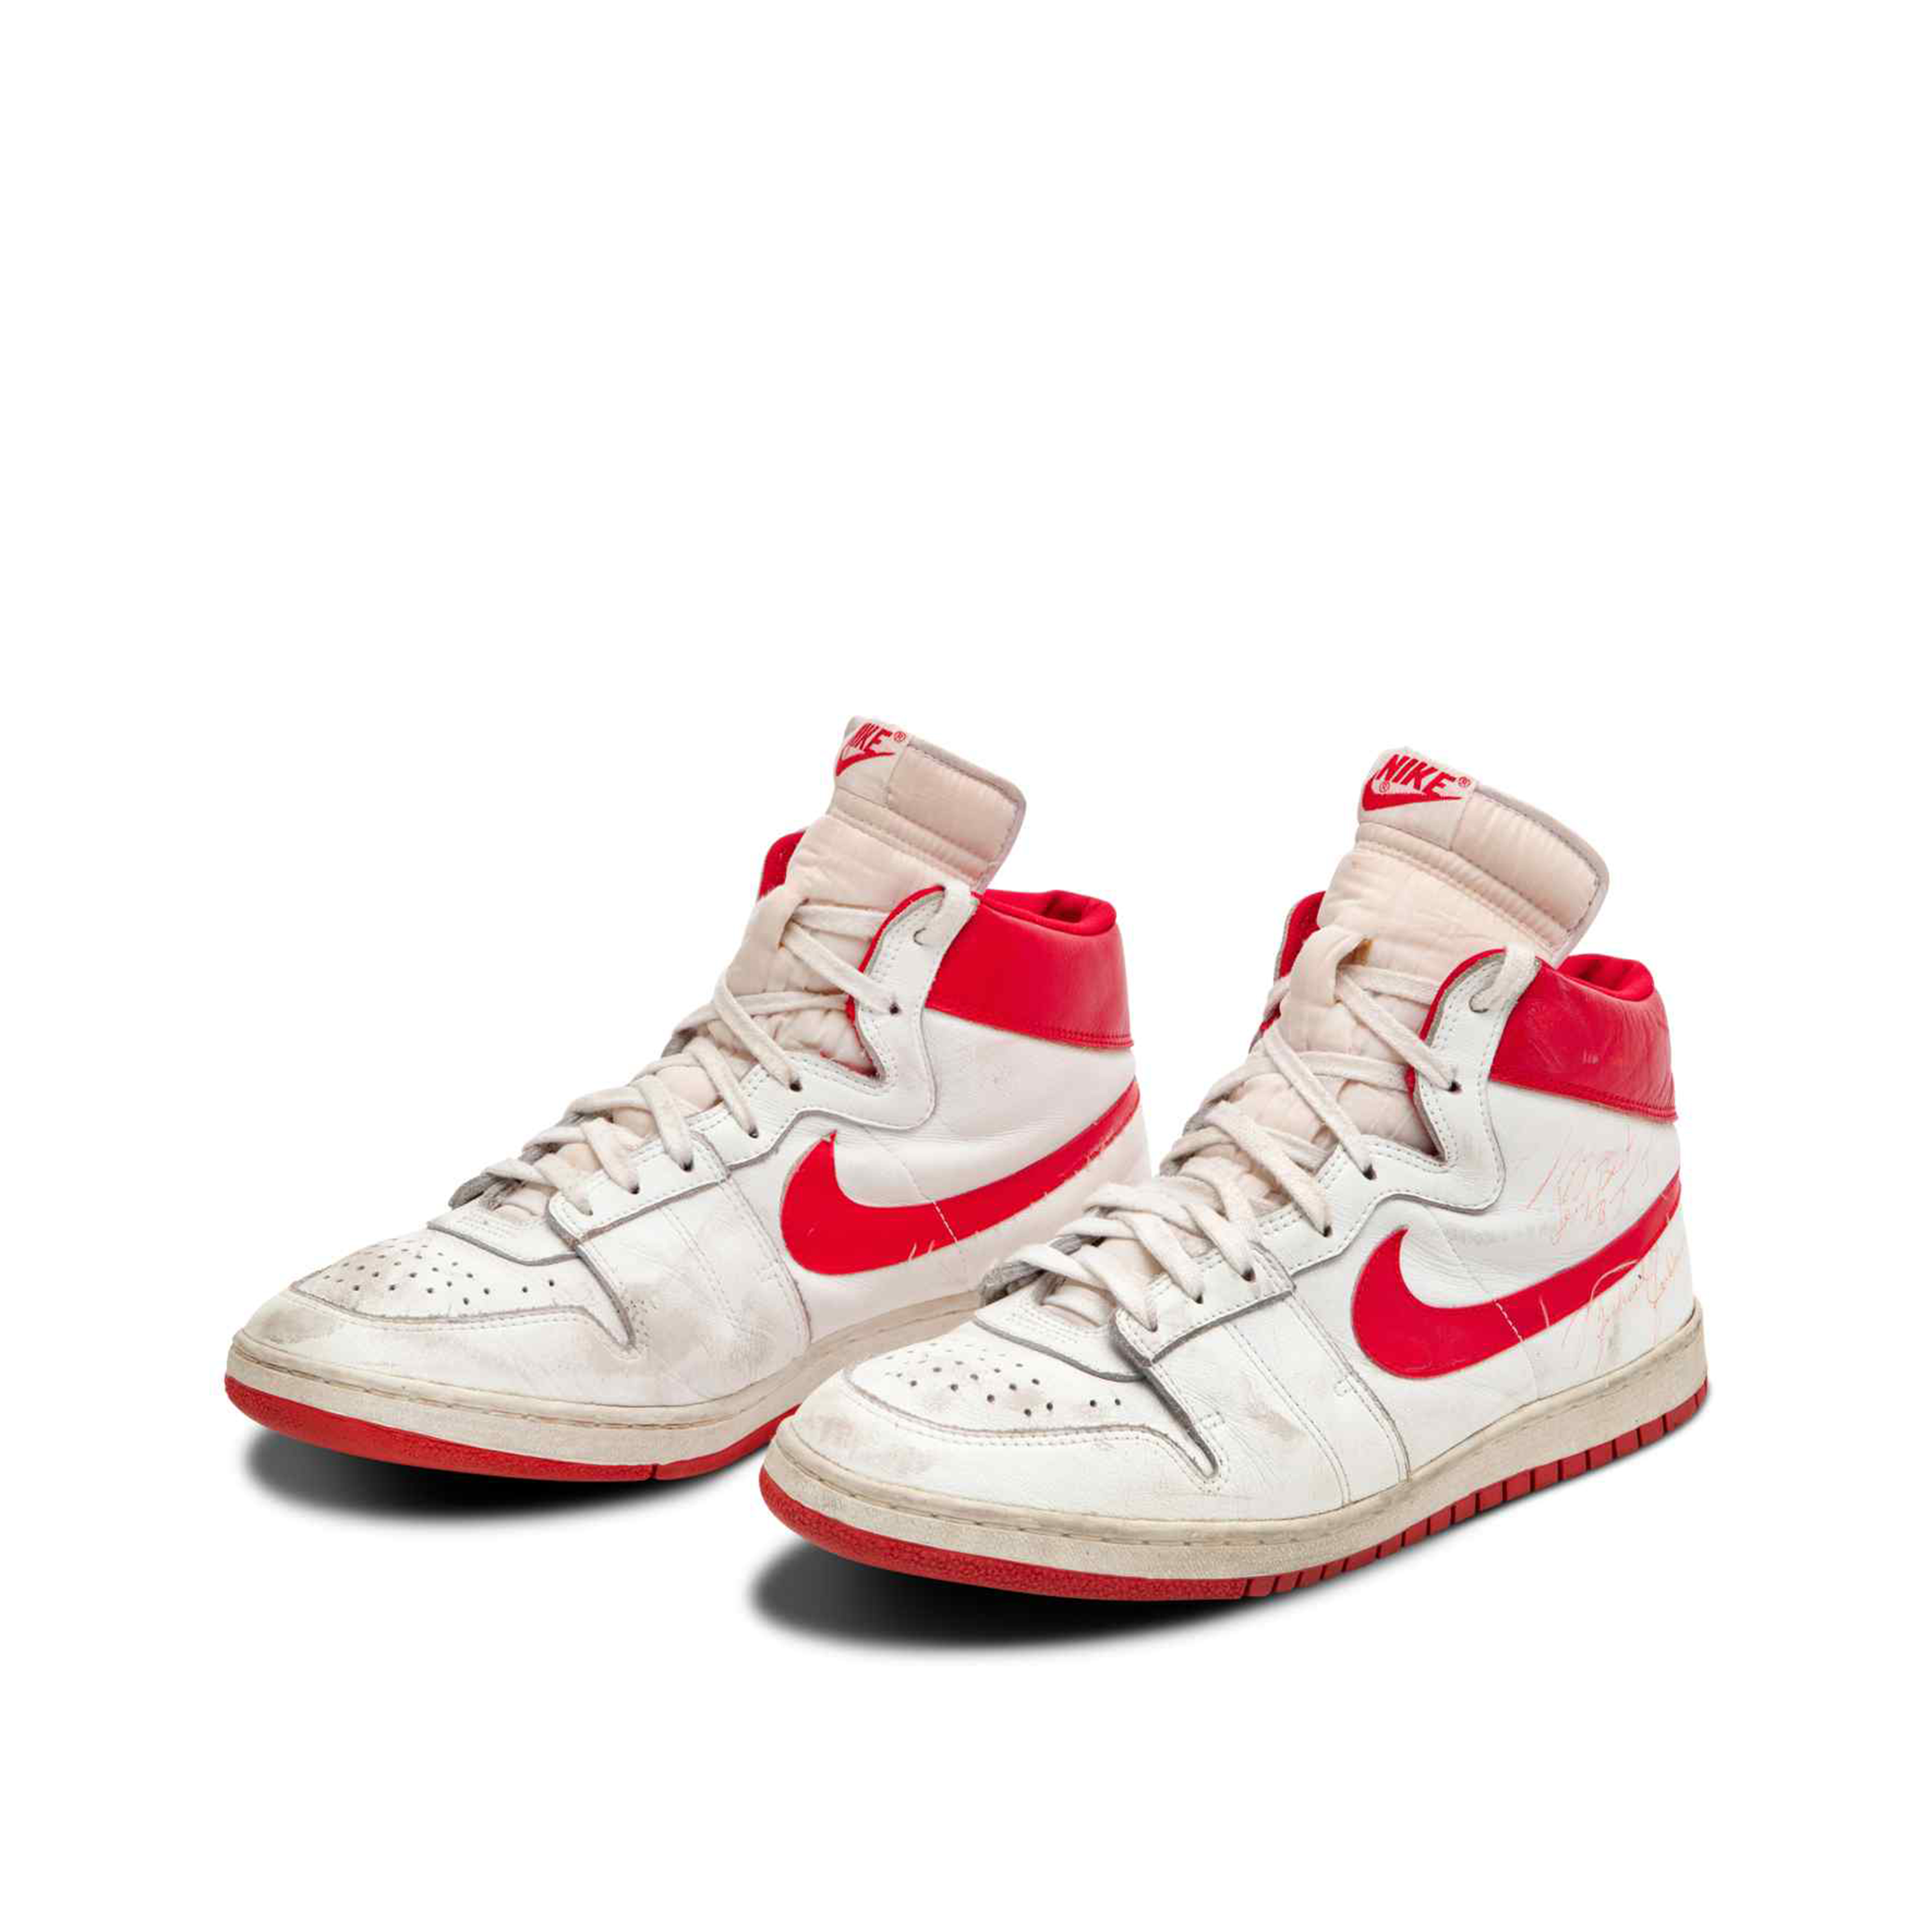 Through engine Duchess Michael Jordan's 1984 Nike Air Ship Sneakers Break Record Sale at Sotheby's  Auction